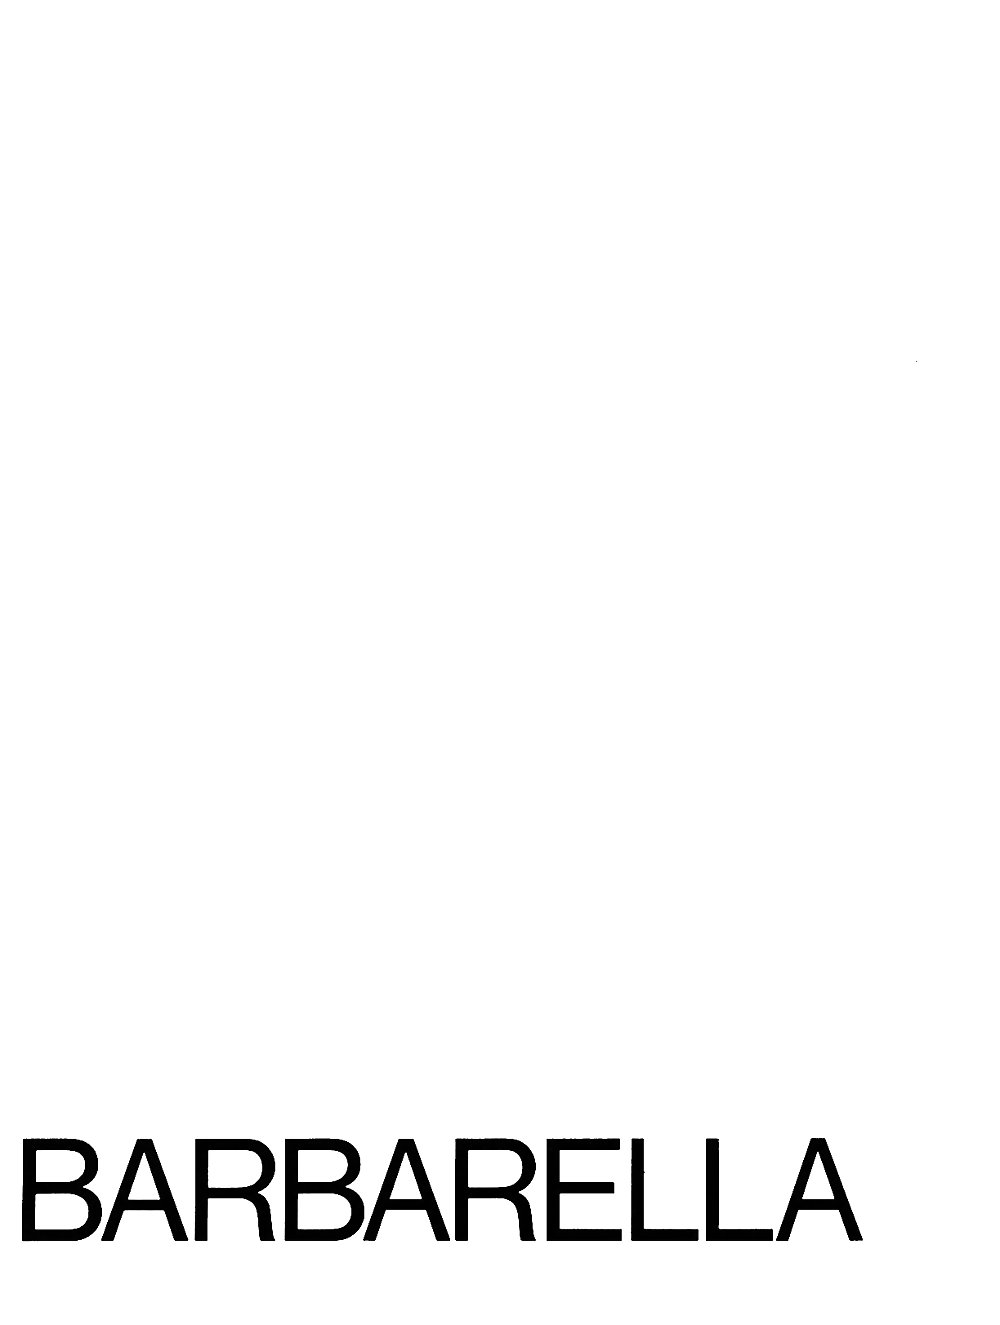 Jean Claude Forest - Barbarella (ENG) #36202823